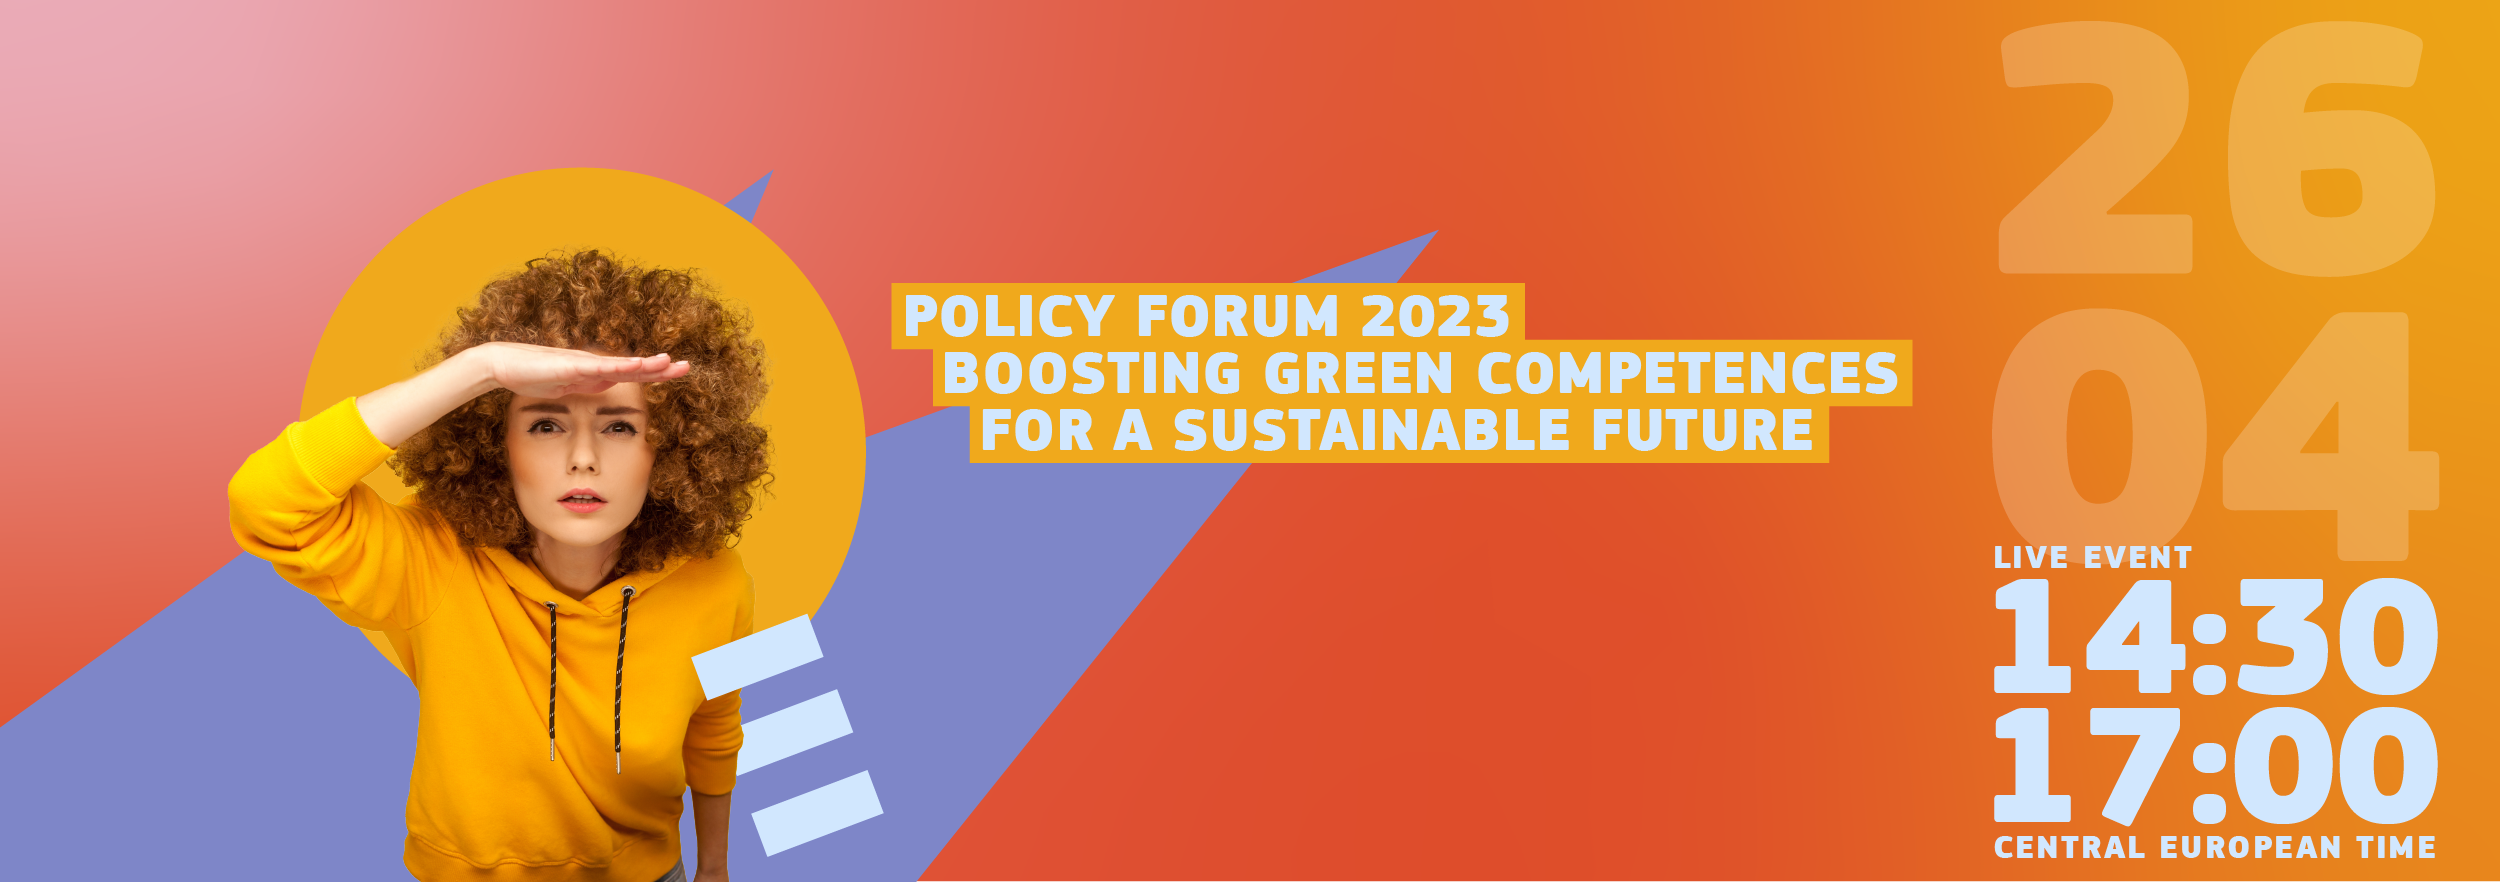 Policy Forum 2023